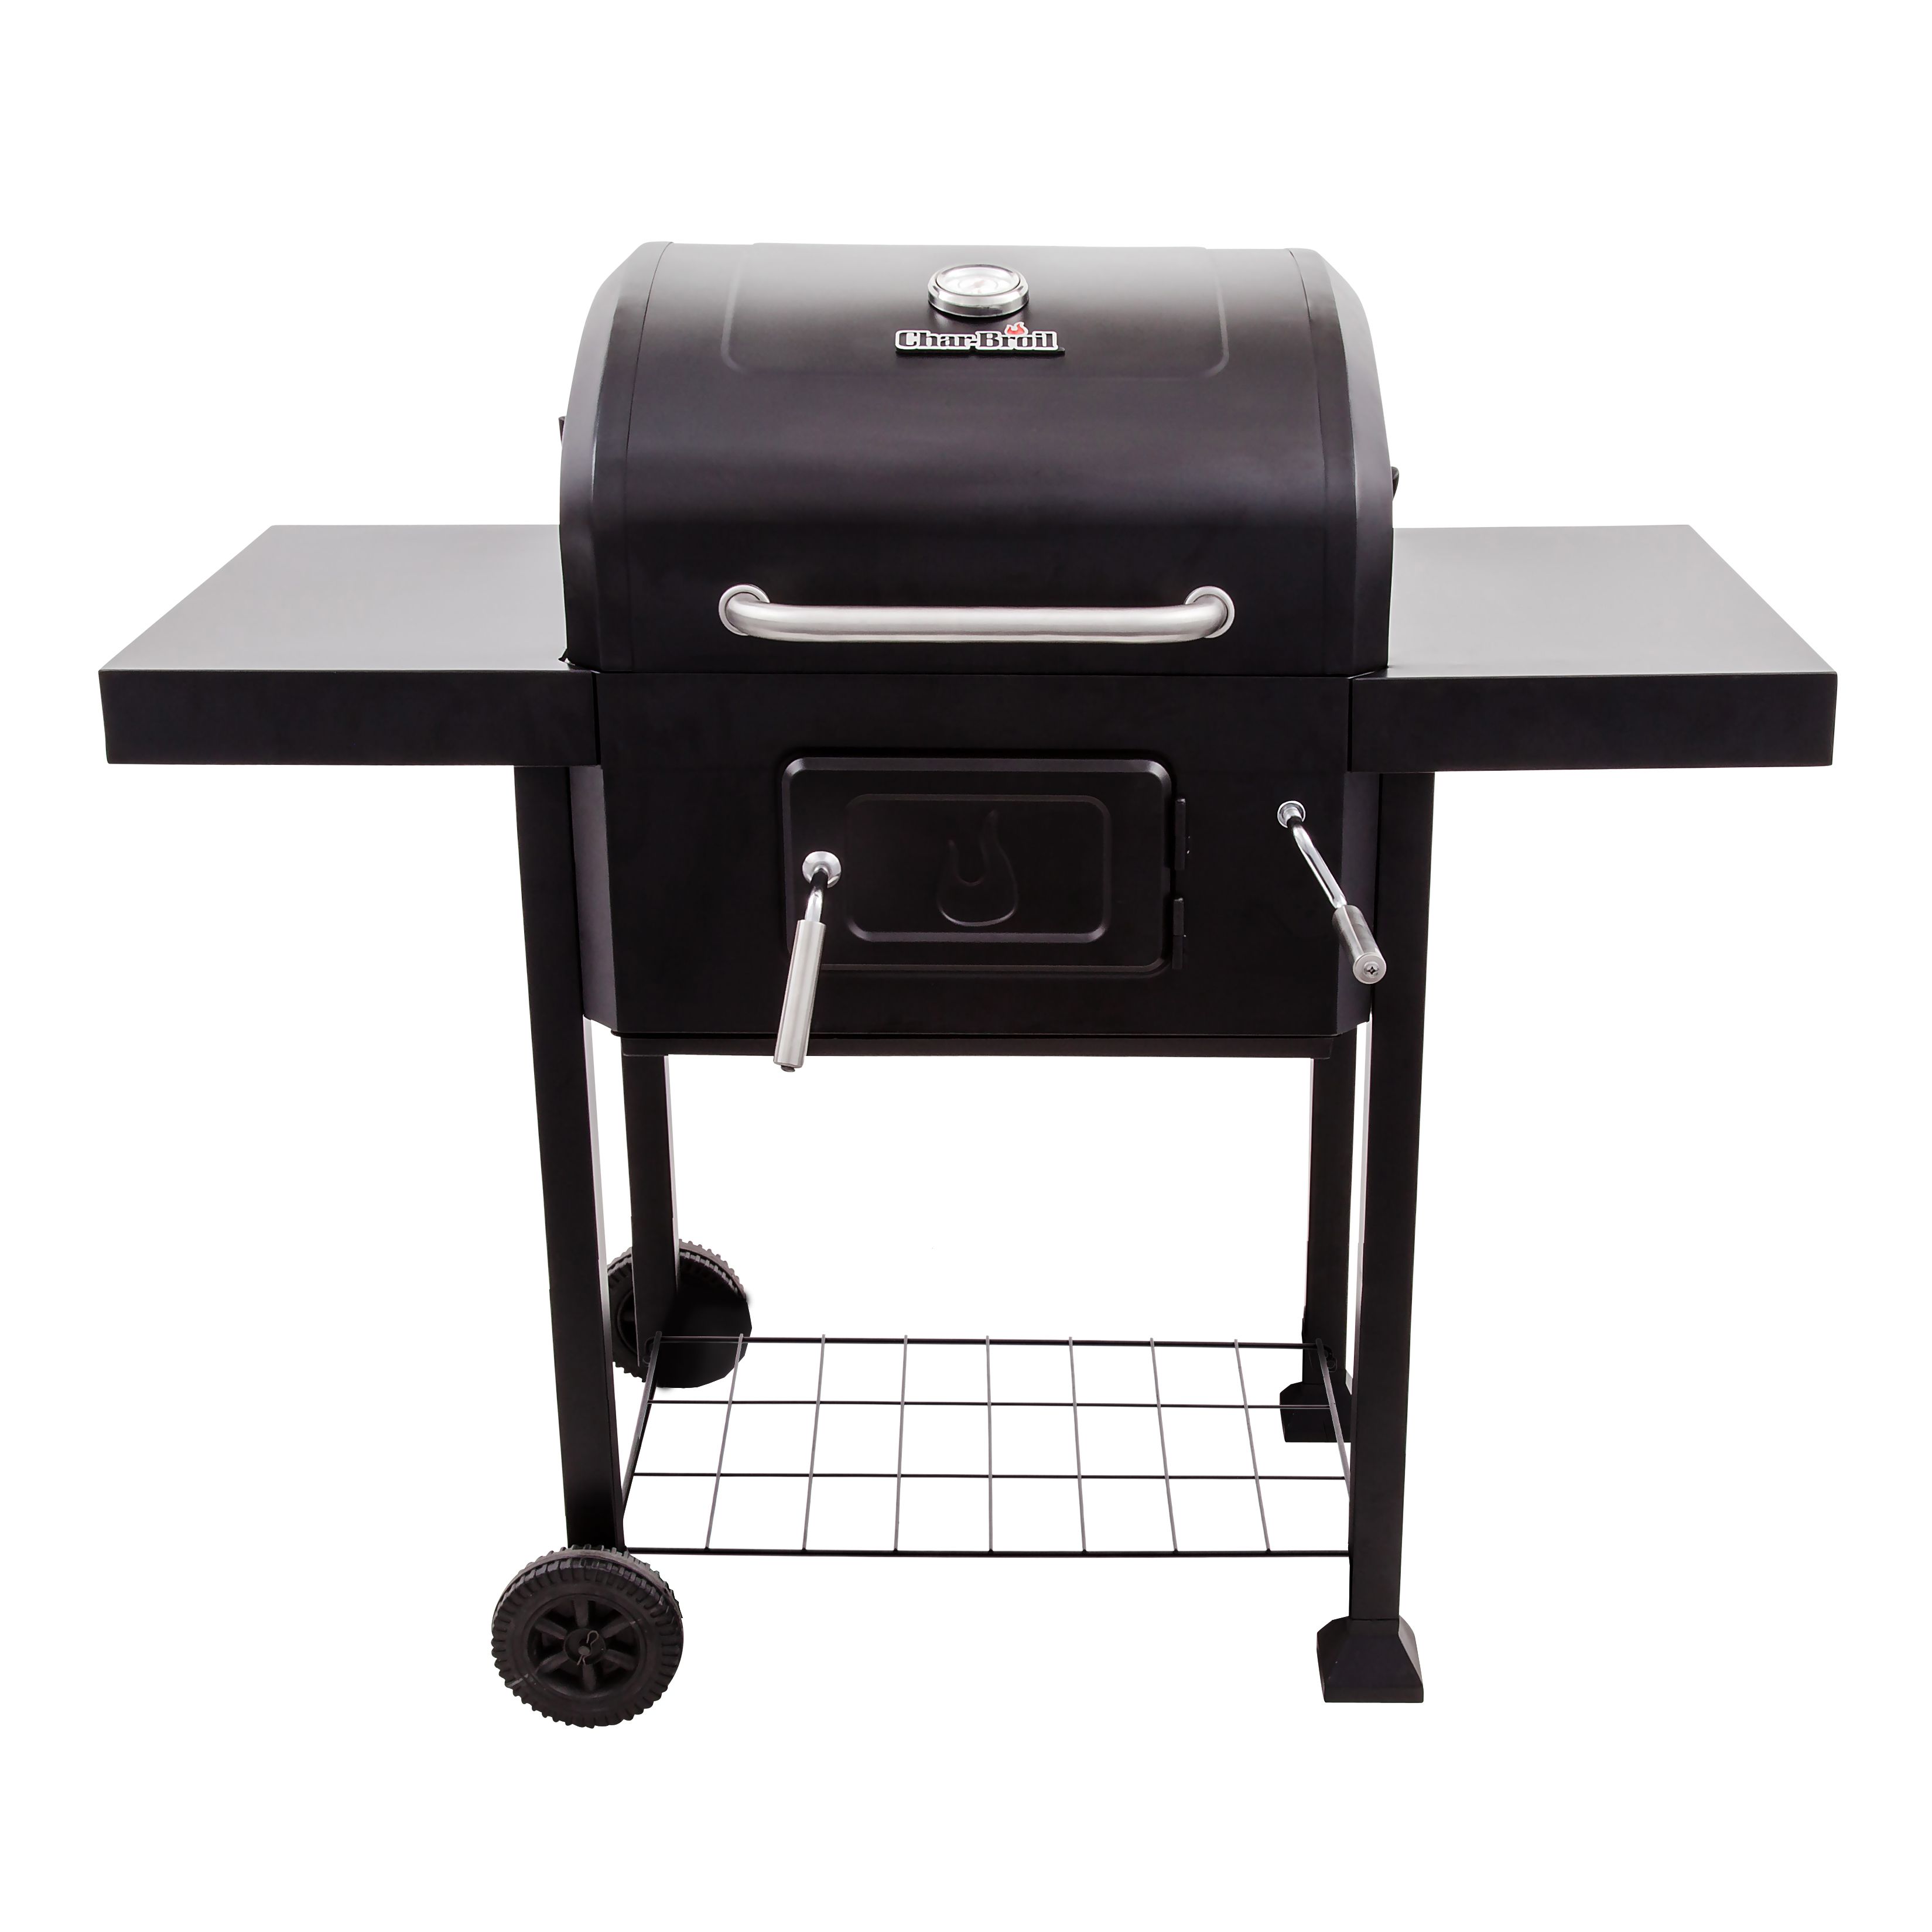 Charbroil 2600 Black Charcoal Barbecue